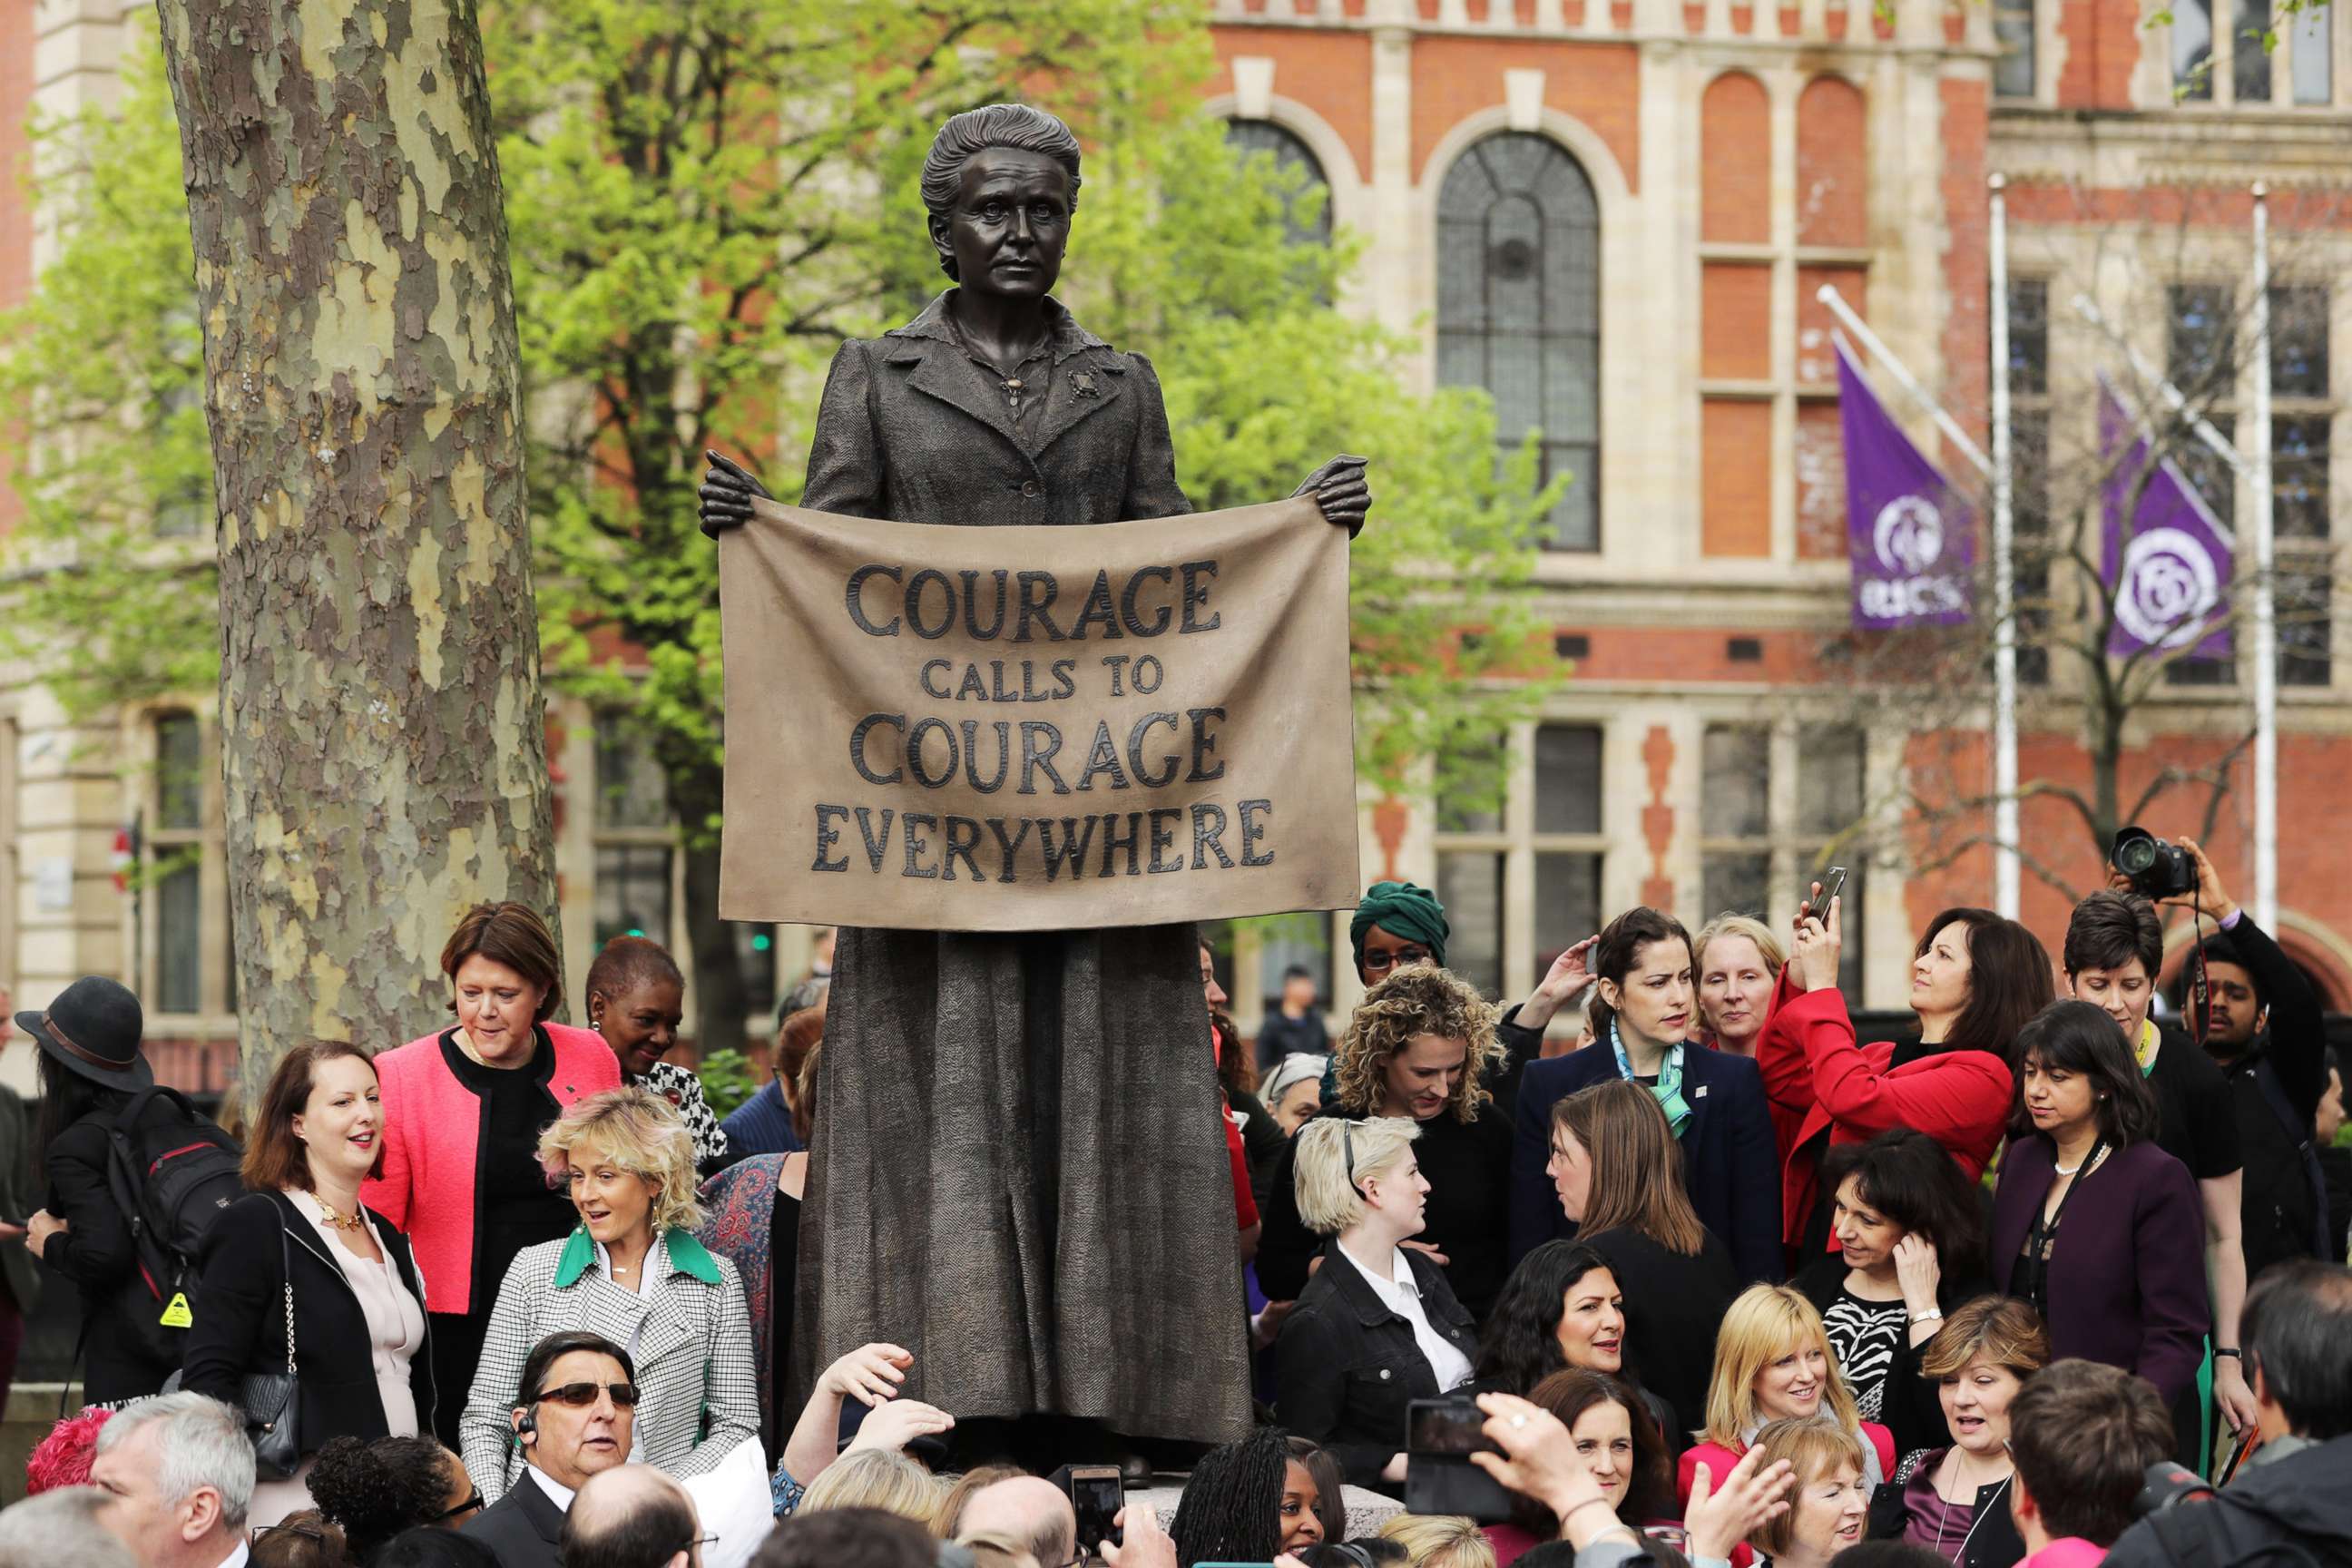 PHOTO: A statue in honor of the first female Suffragette Millicent Fawcett is unveiled during a ceremony in Parliament Square, April 24, 2018 in London.